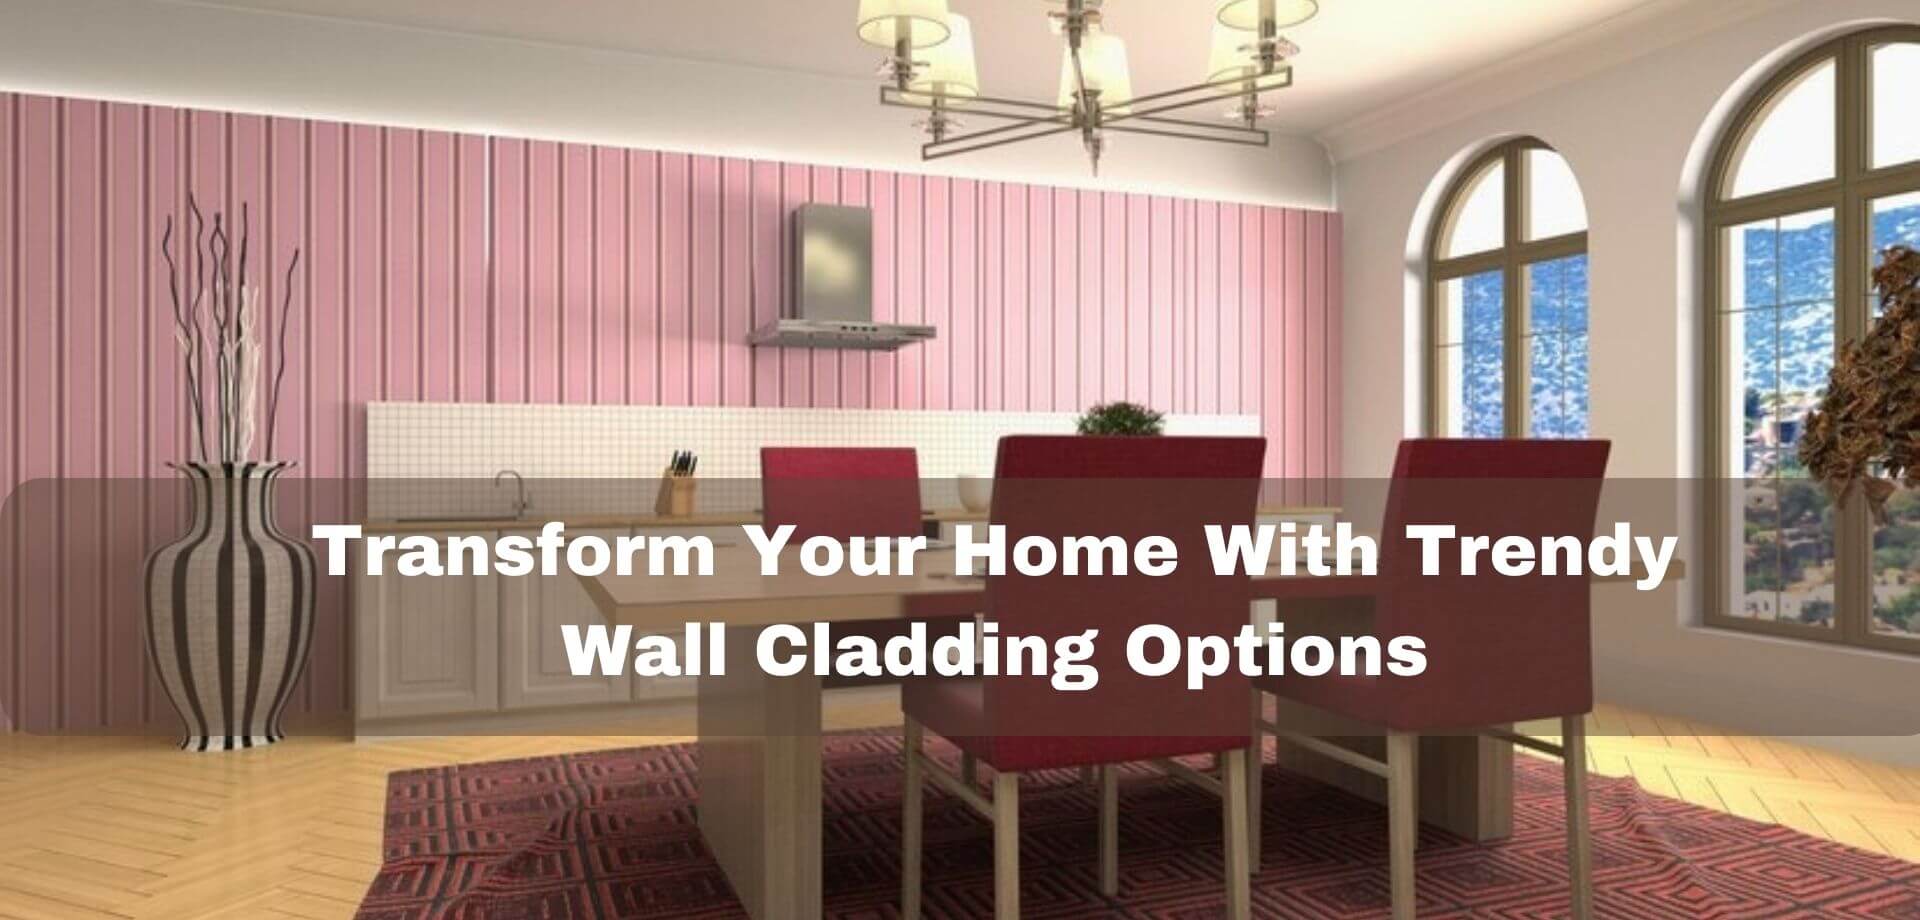 Transform Your Home With Trendy Wall Cladding Options